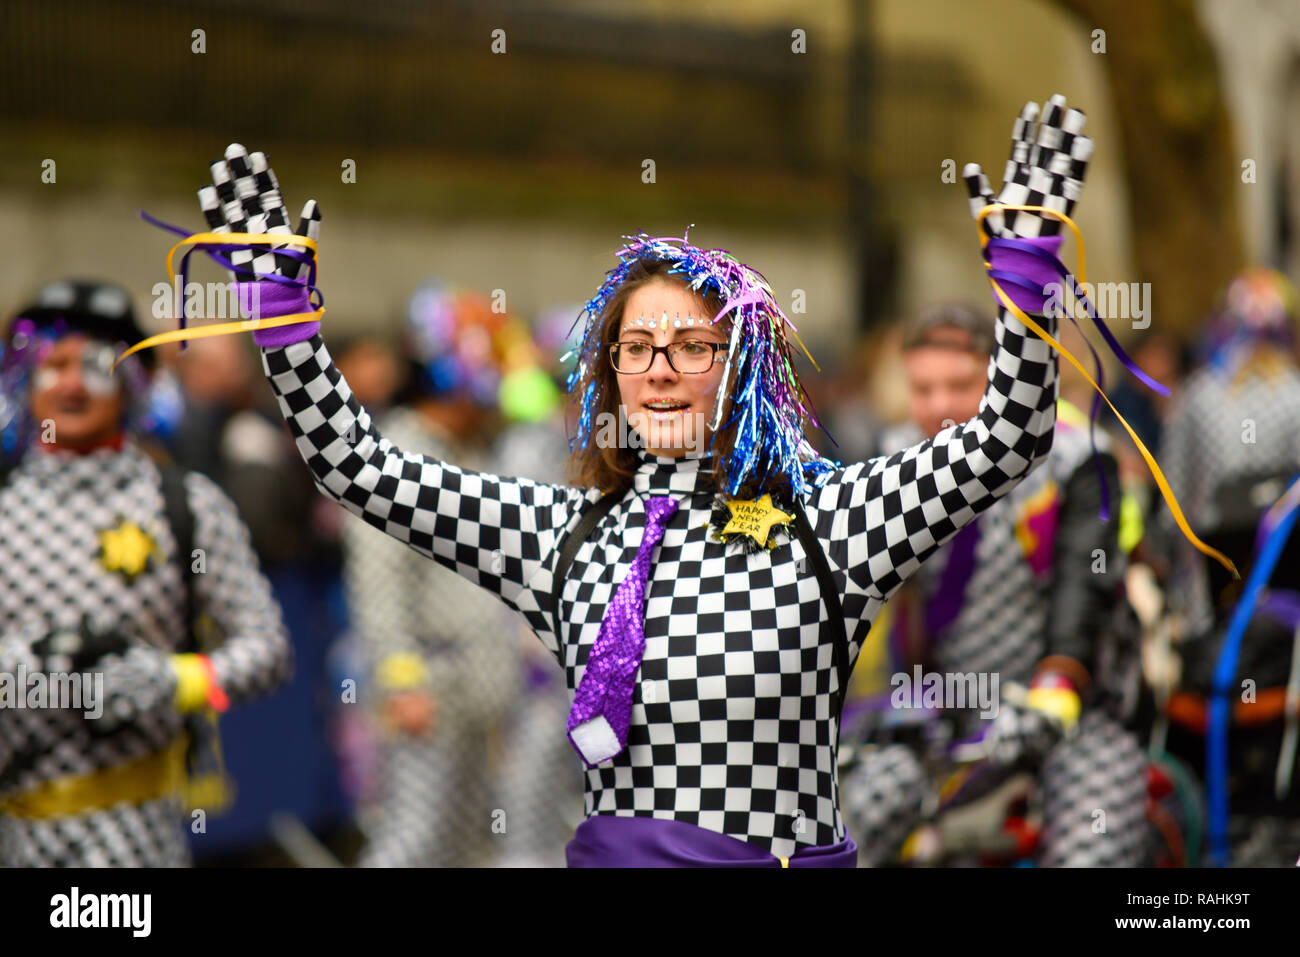 Skaters at LNYDP 2019 at London's New Year's Day Parade, UK. Female in costume Stock Photo